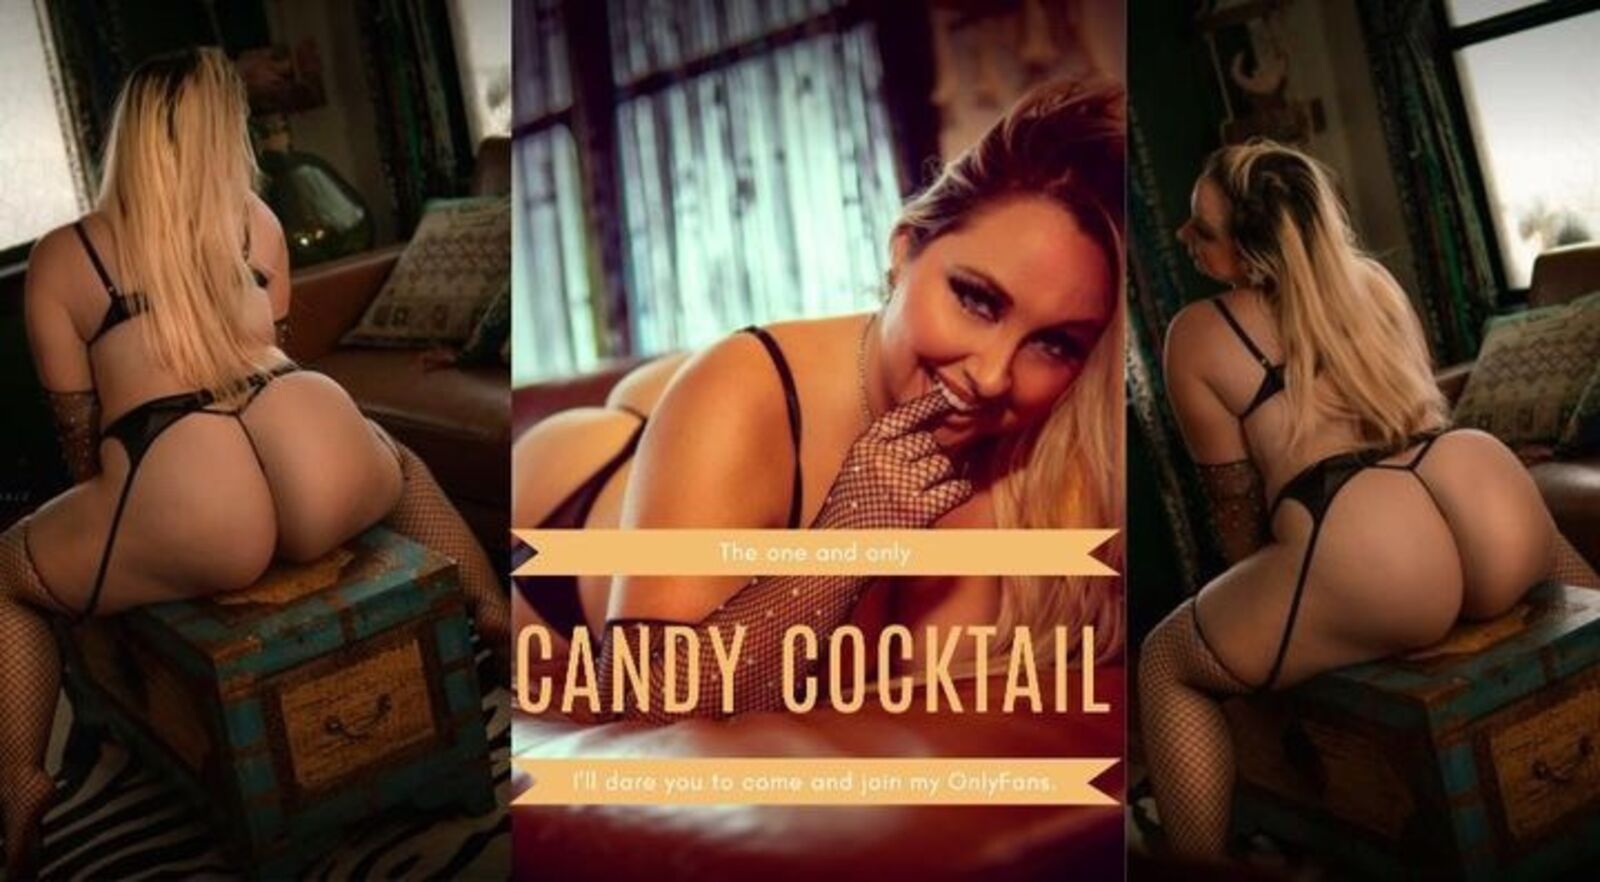 See CandyCocktail profile